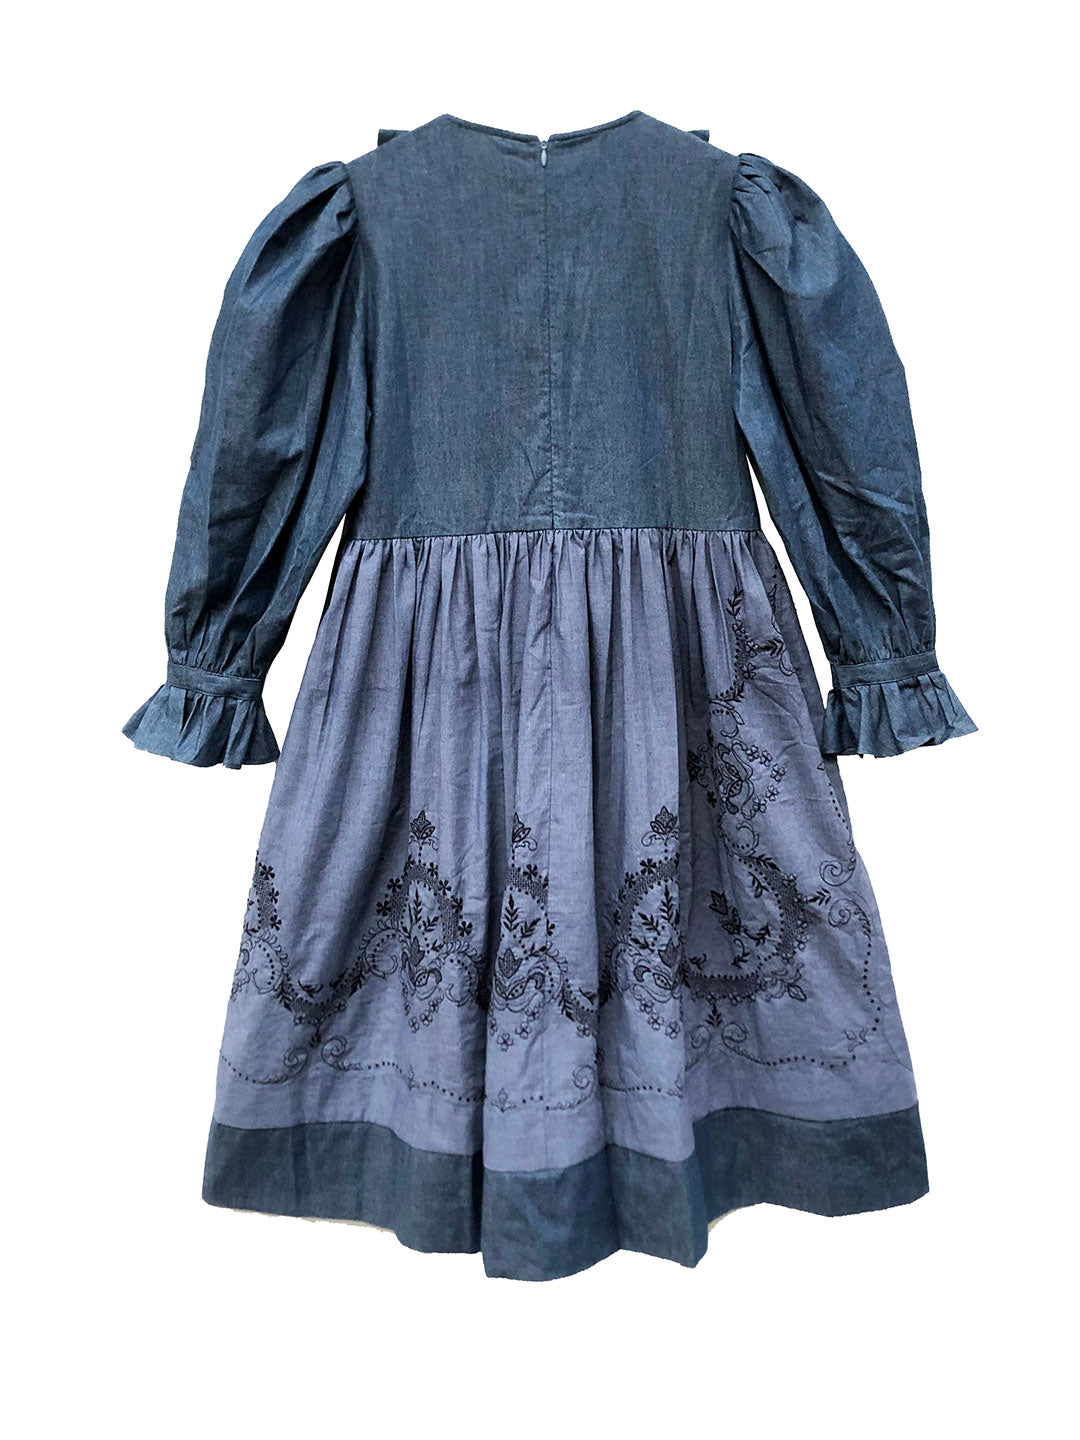 Unlogical Poem One-of-a-kind Victorian Style Embroidered Denim Dress